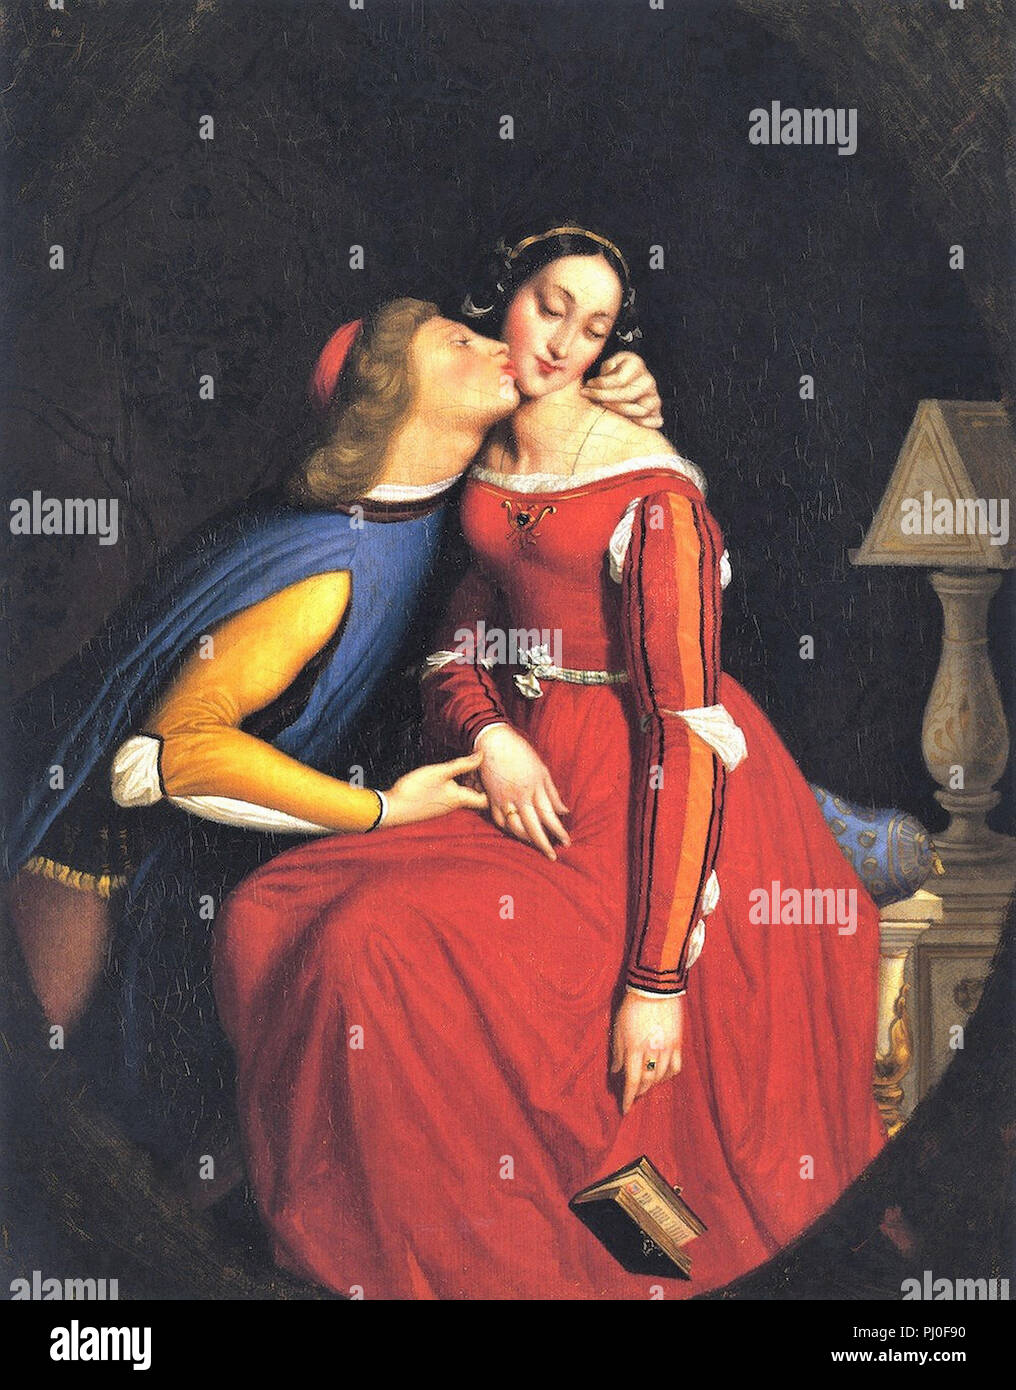 Paolo and Francesca - Jean Auguste Dominique Ingres as art print